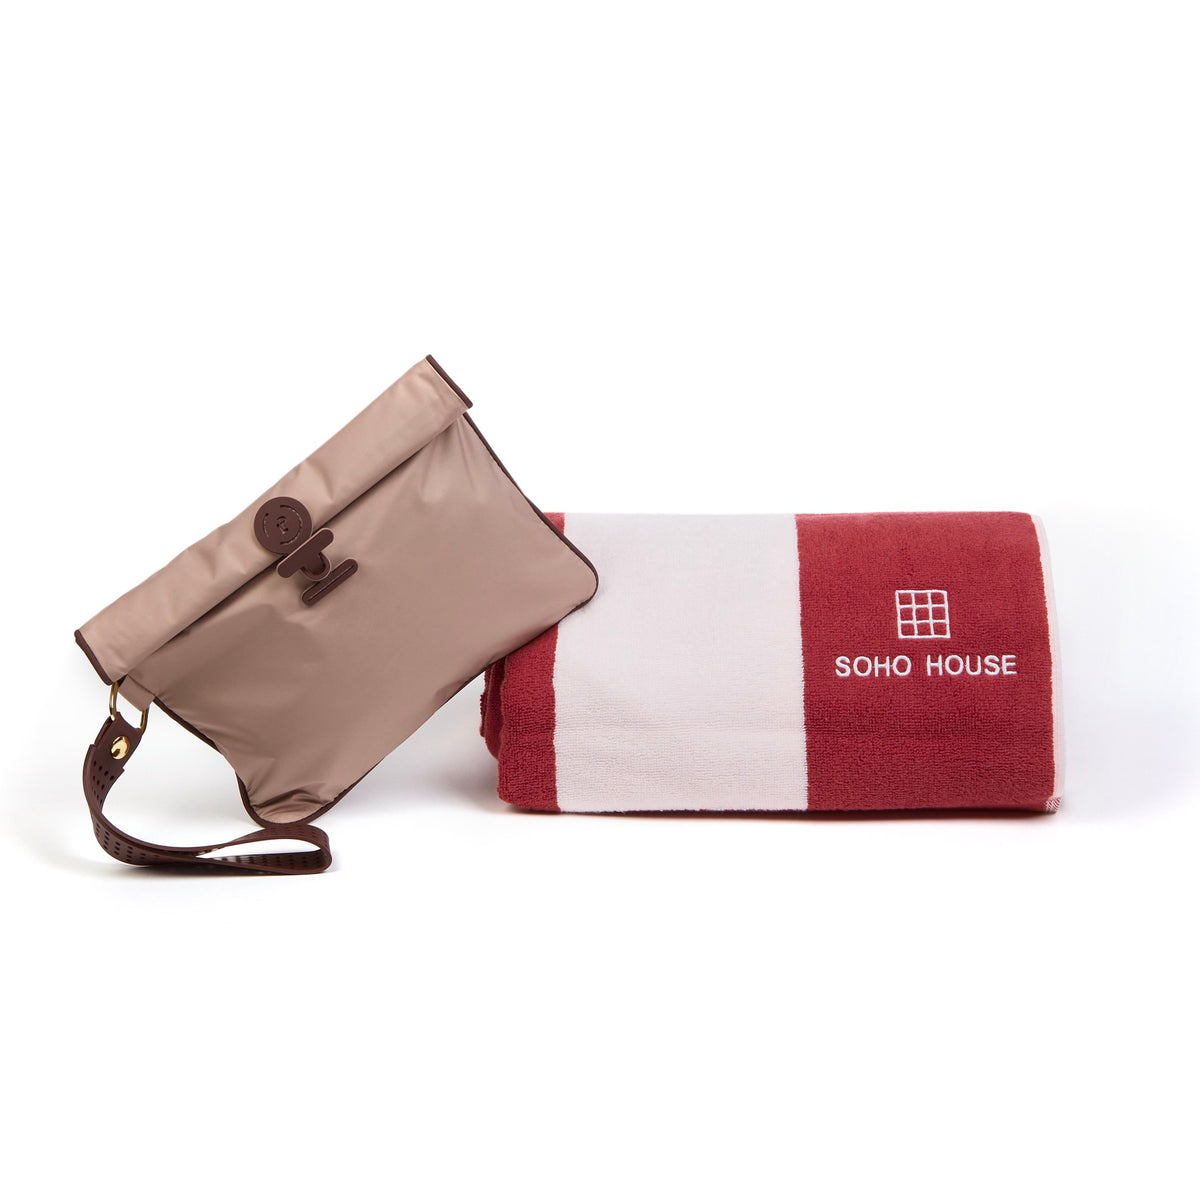 Small Wet Bag in Rose Oxblood colourway leaning on folded Soho House towel  